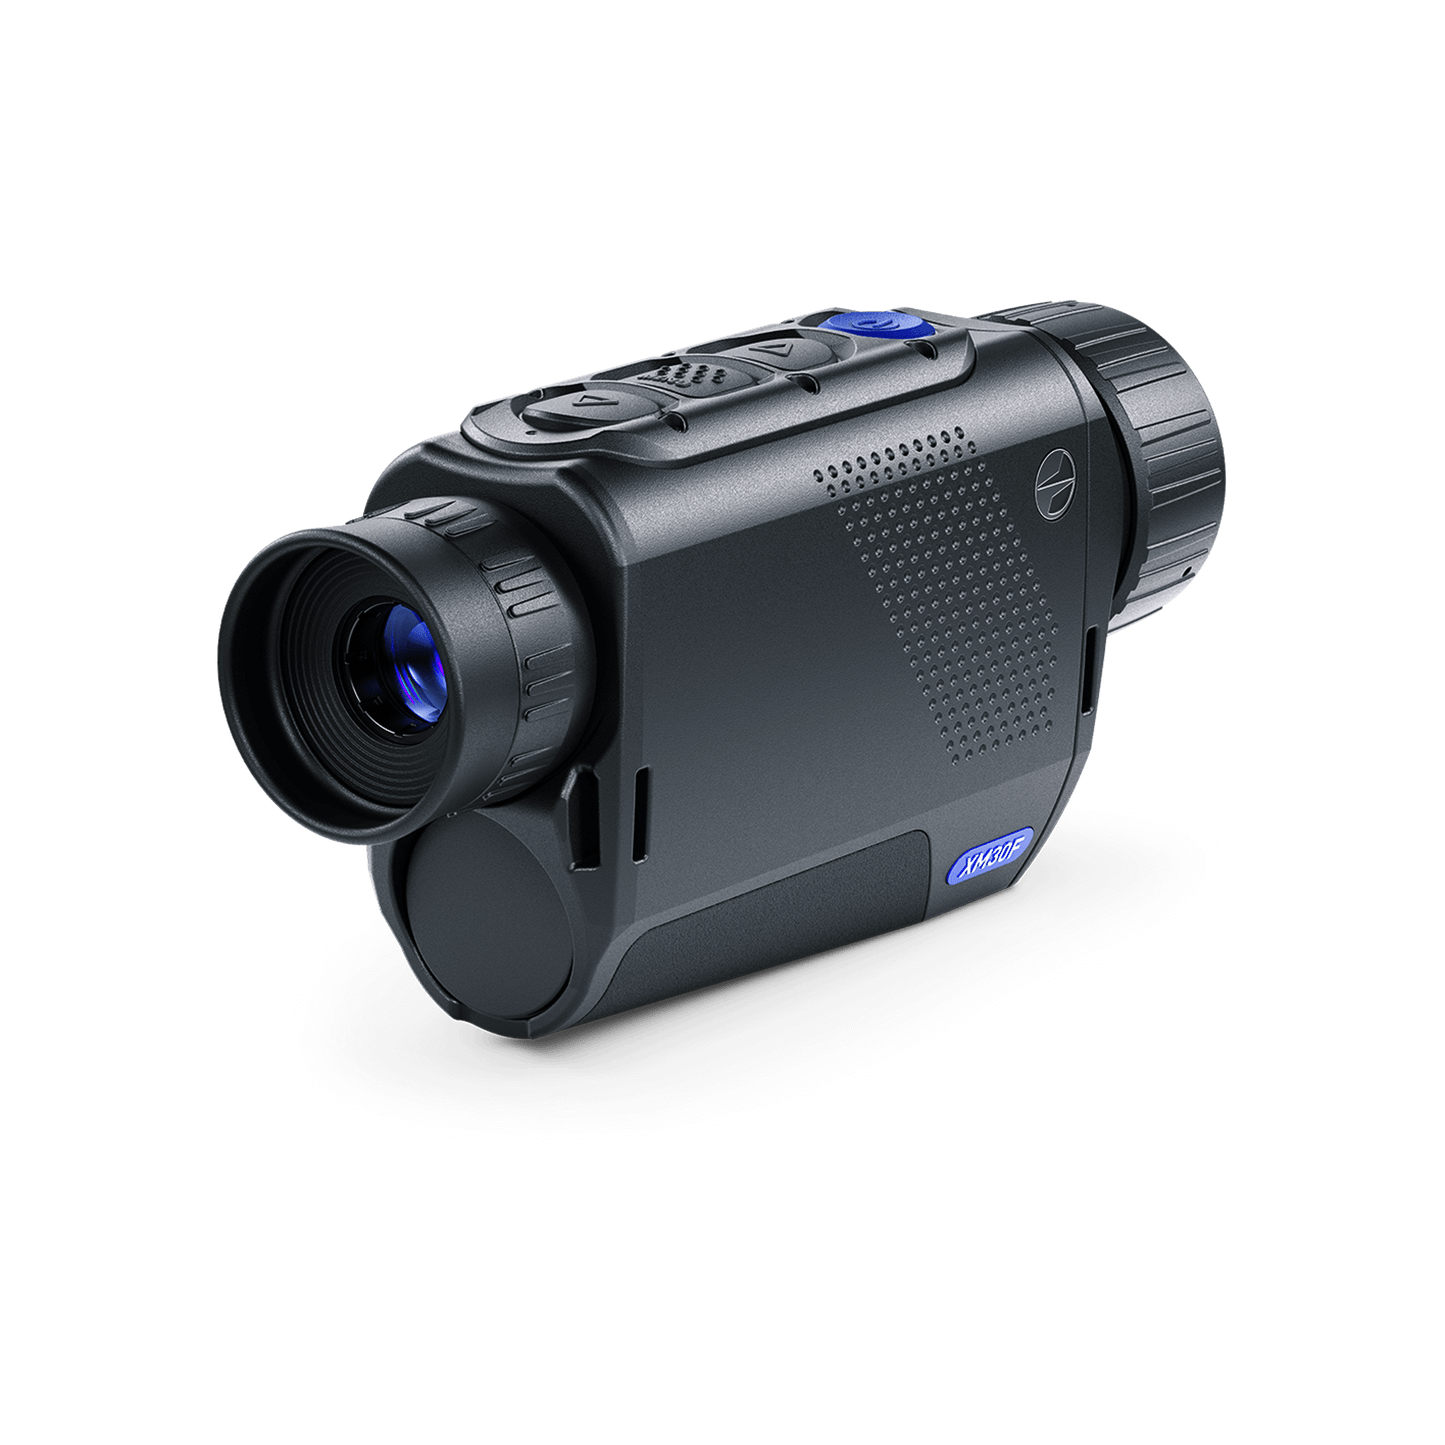 Cape Thermal Pulsar Axion XM30F Handheld Thermal Monocular for Sale Rear Right View